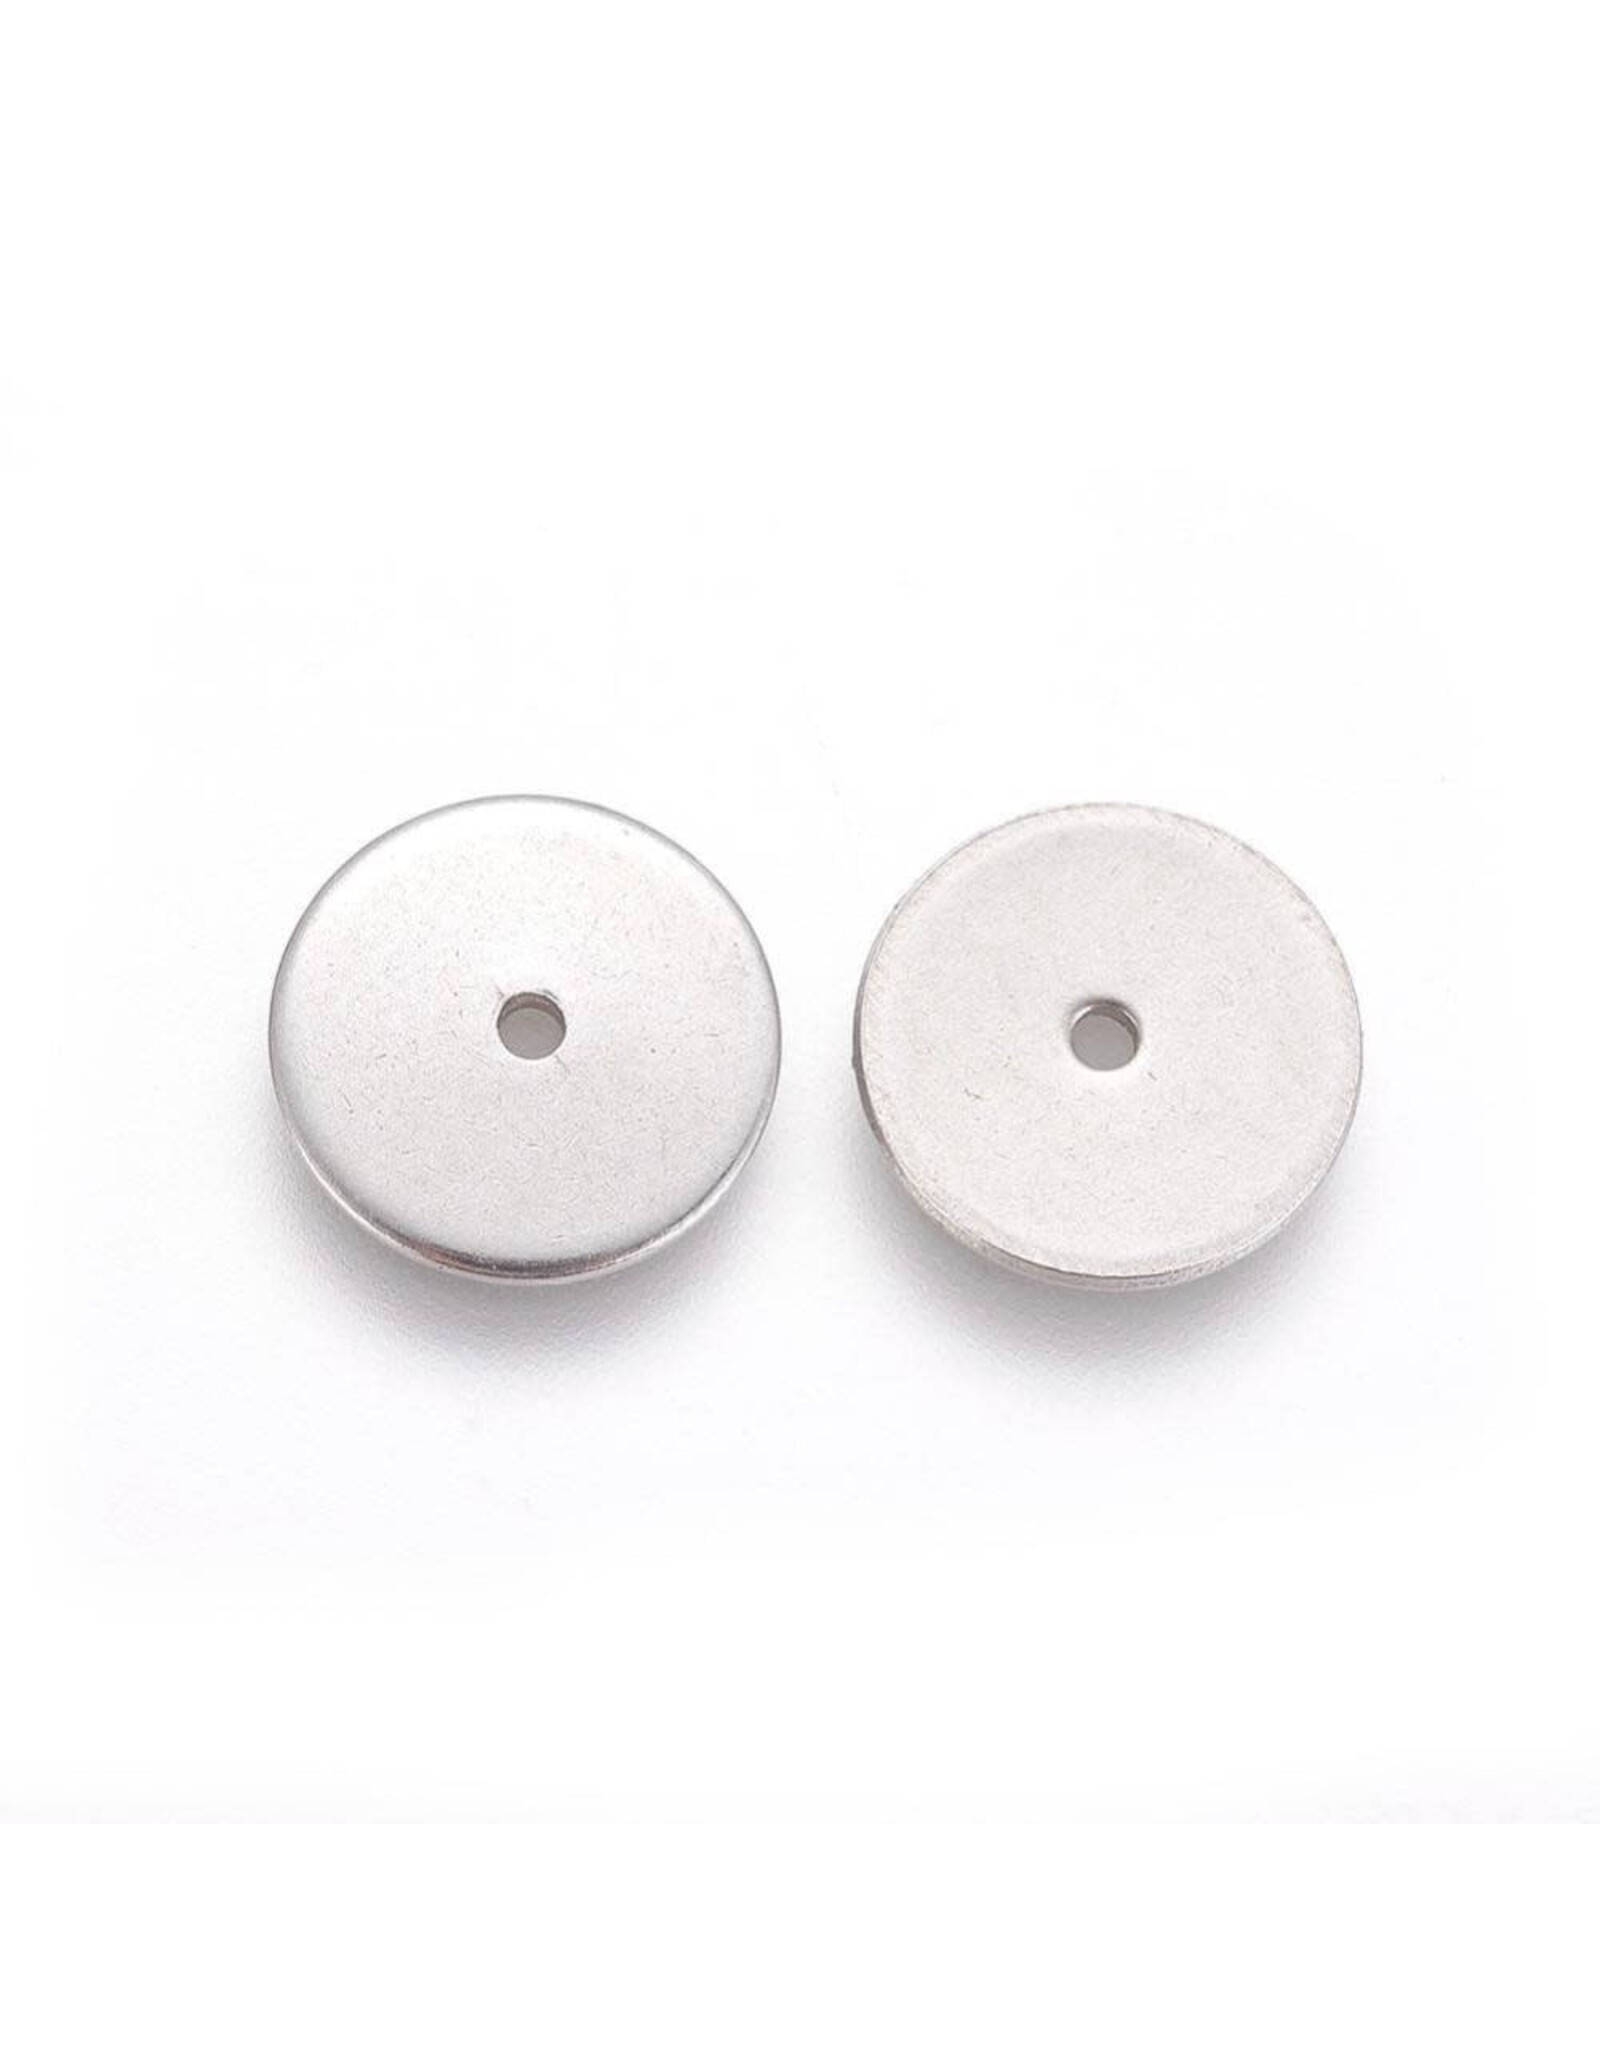 Disc Spacer Bead  Stainless Steel 6x.7mm   x50